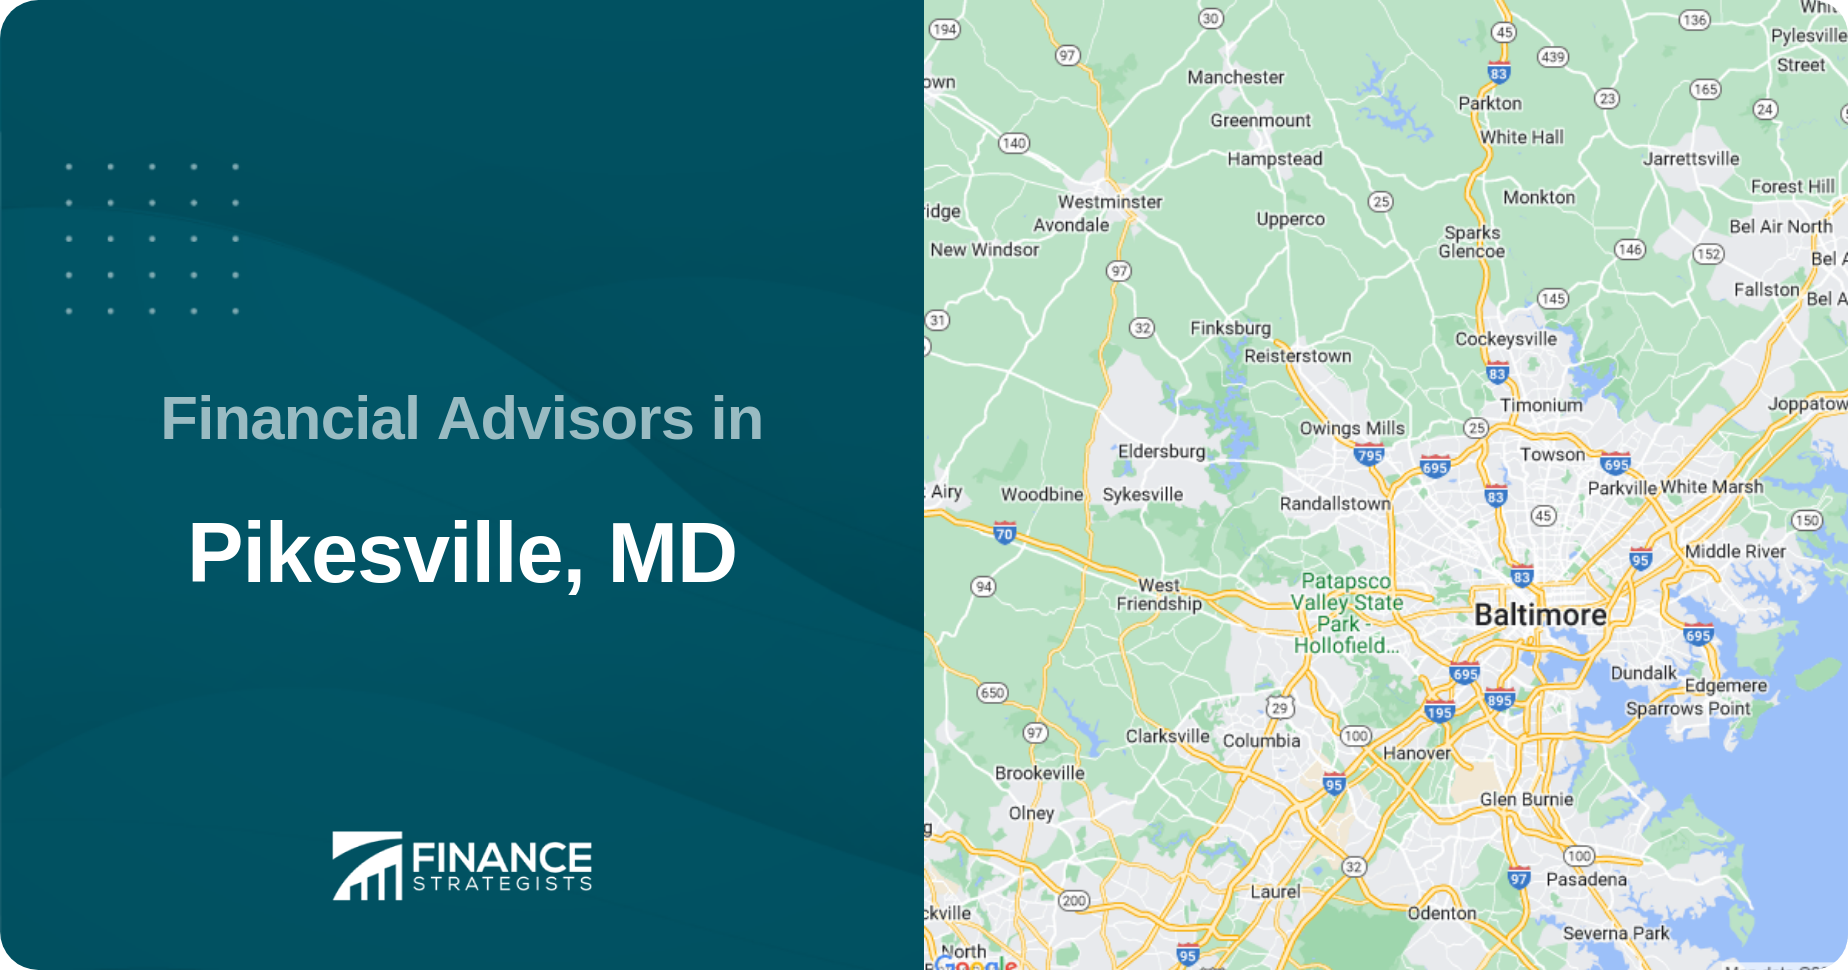 Financial Advisors in Pikesville, MD